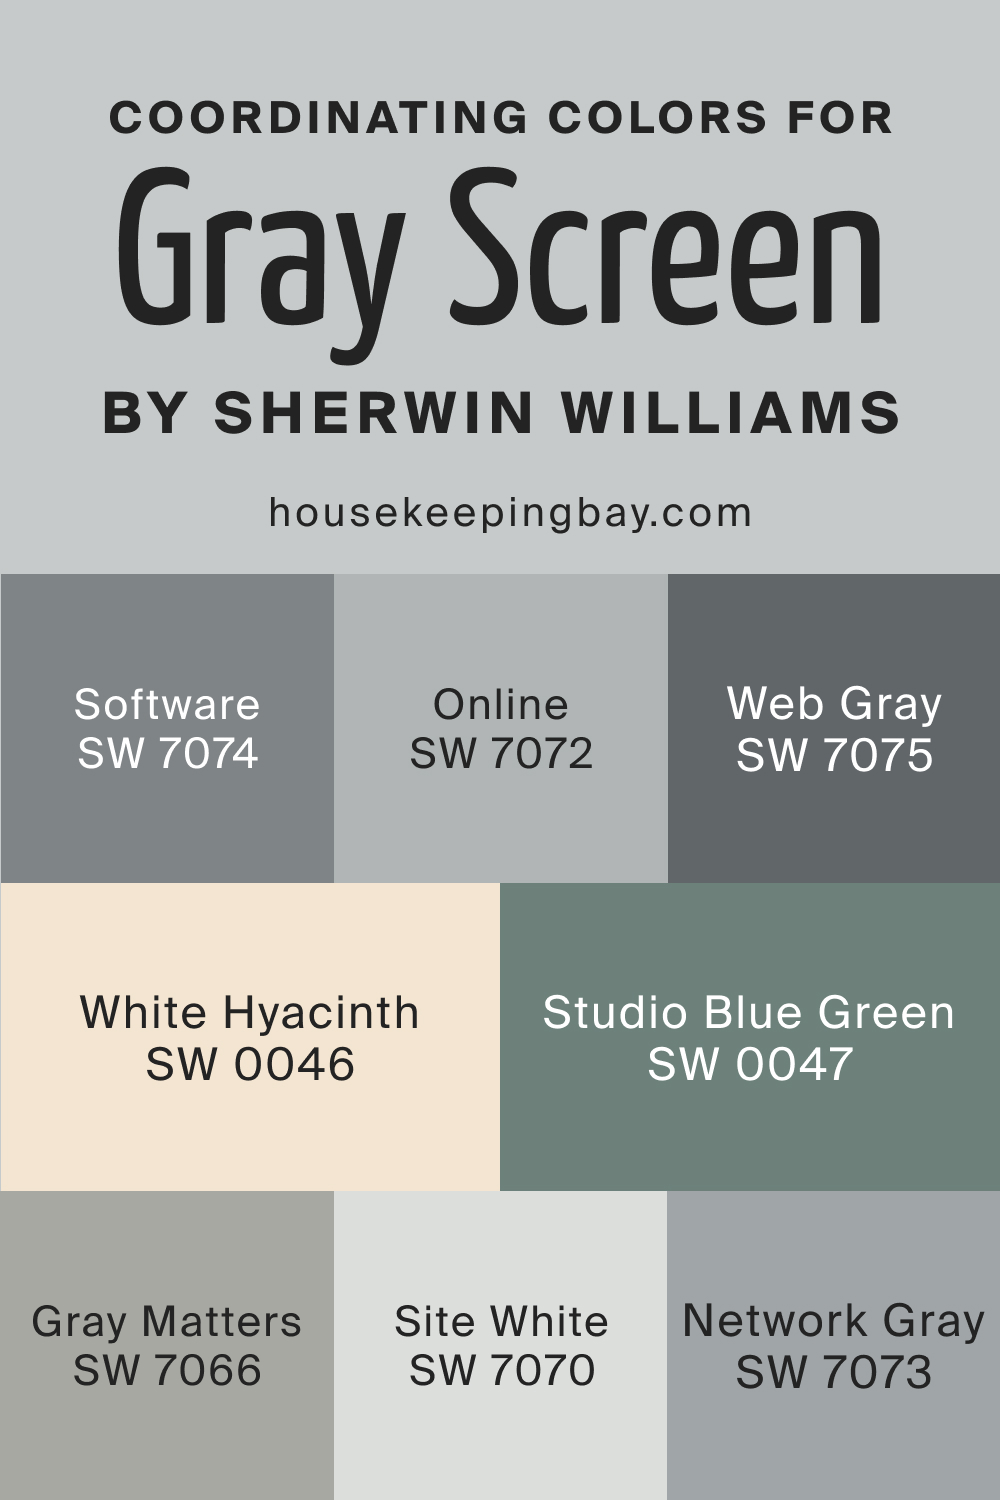 Coordinating Colors for SW Gray Screen by Sherwin Williams